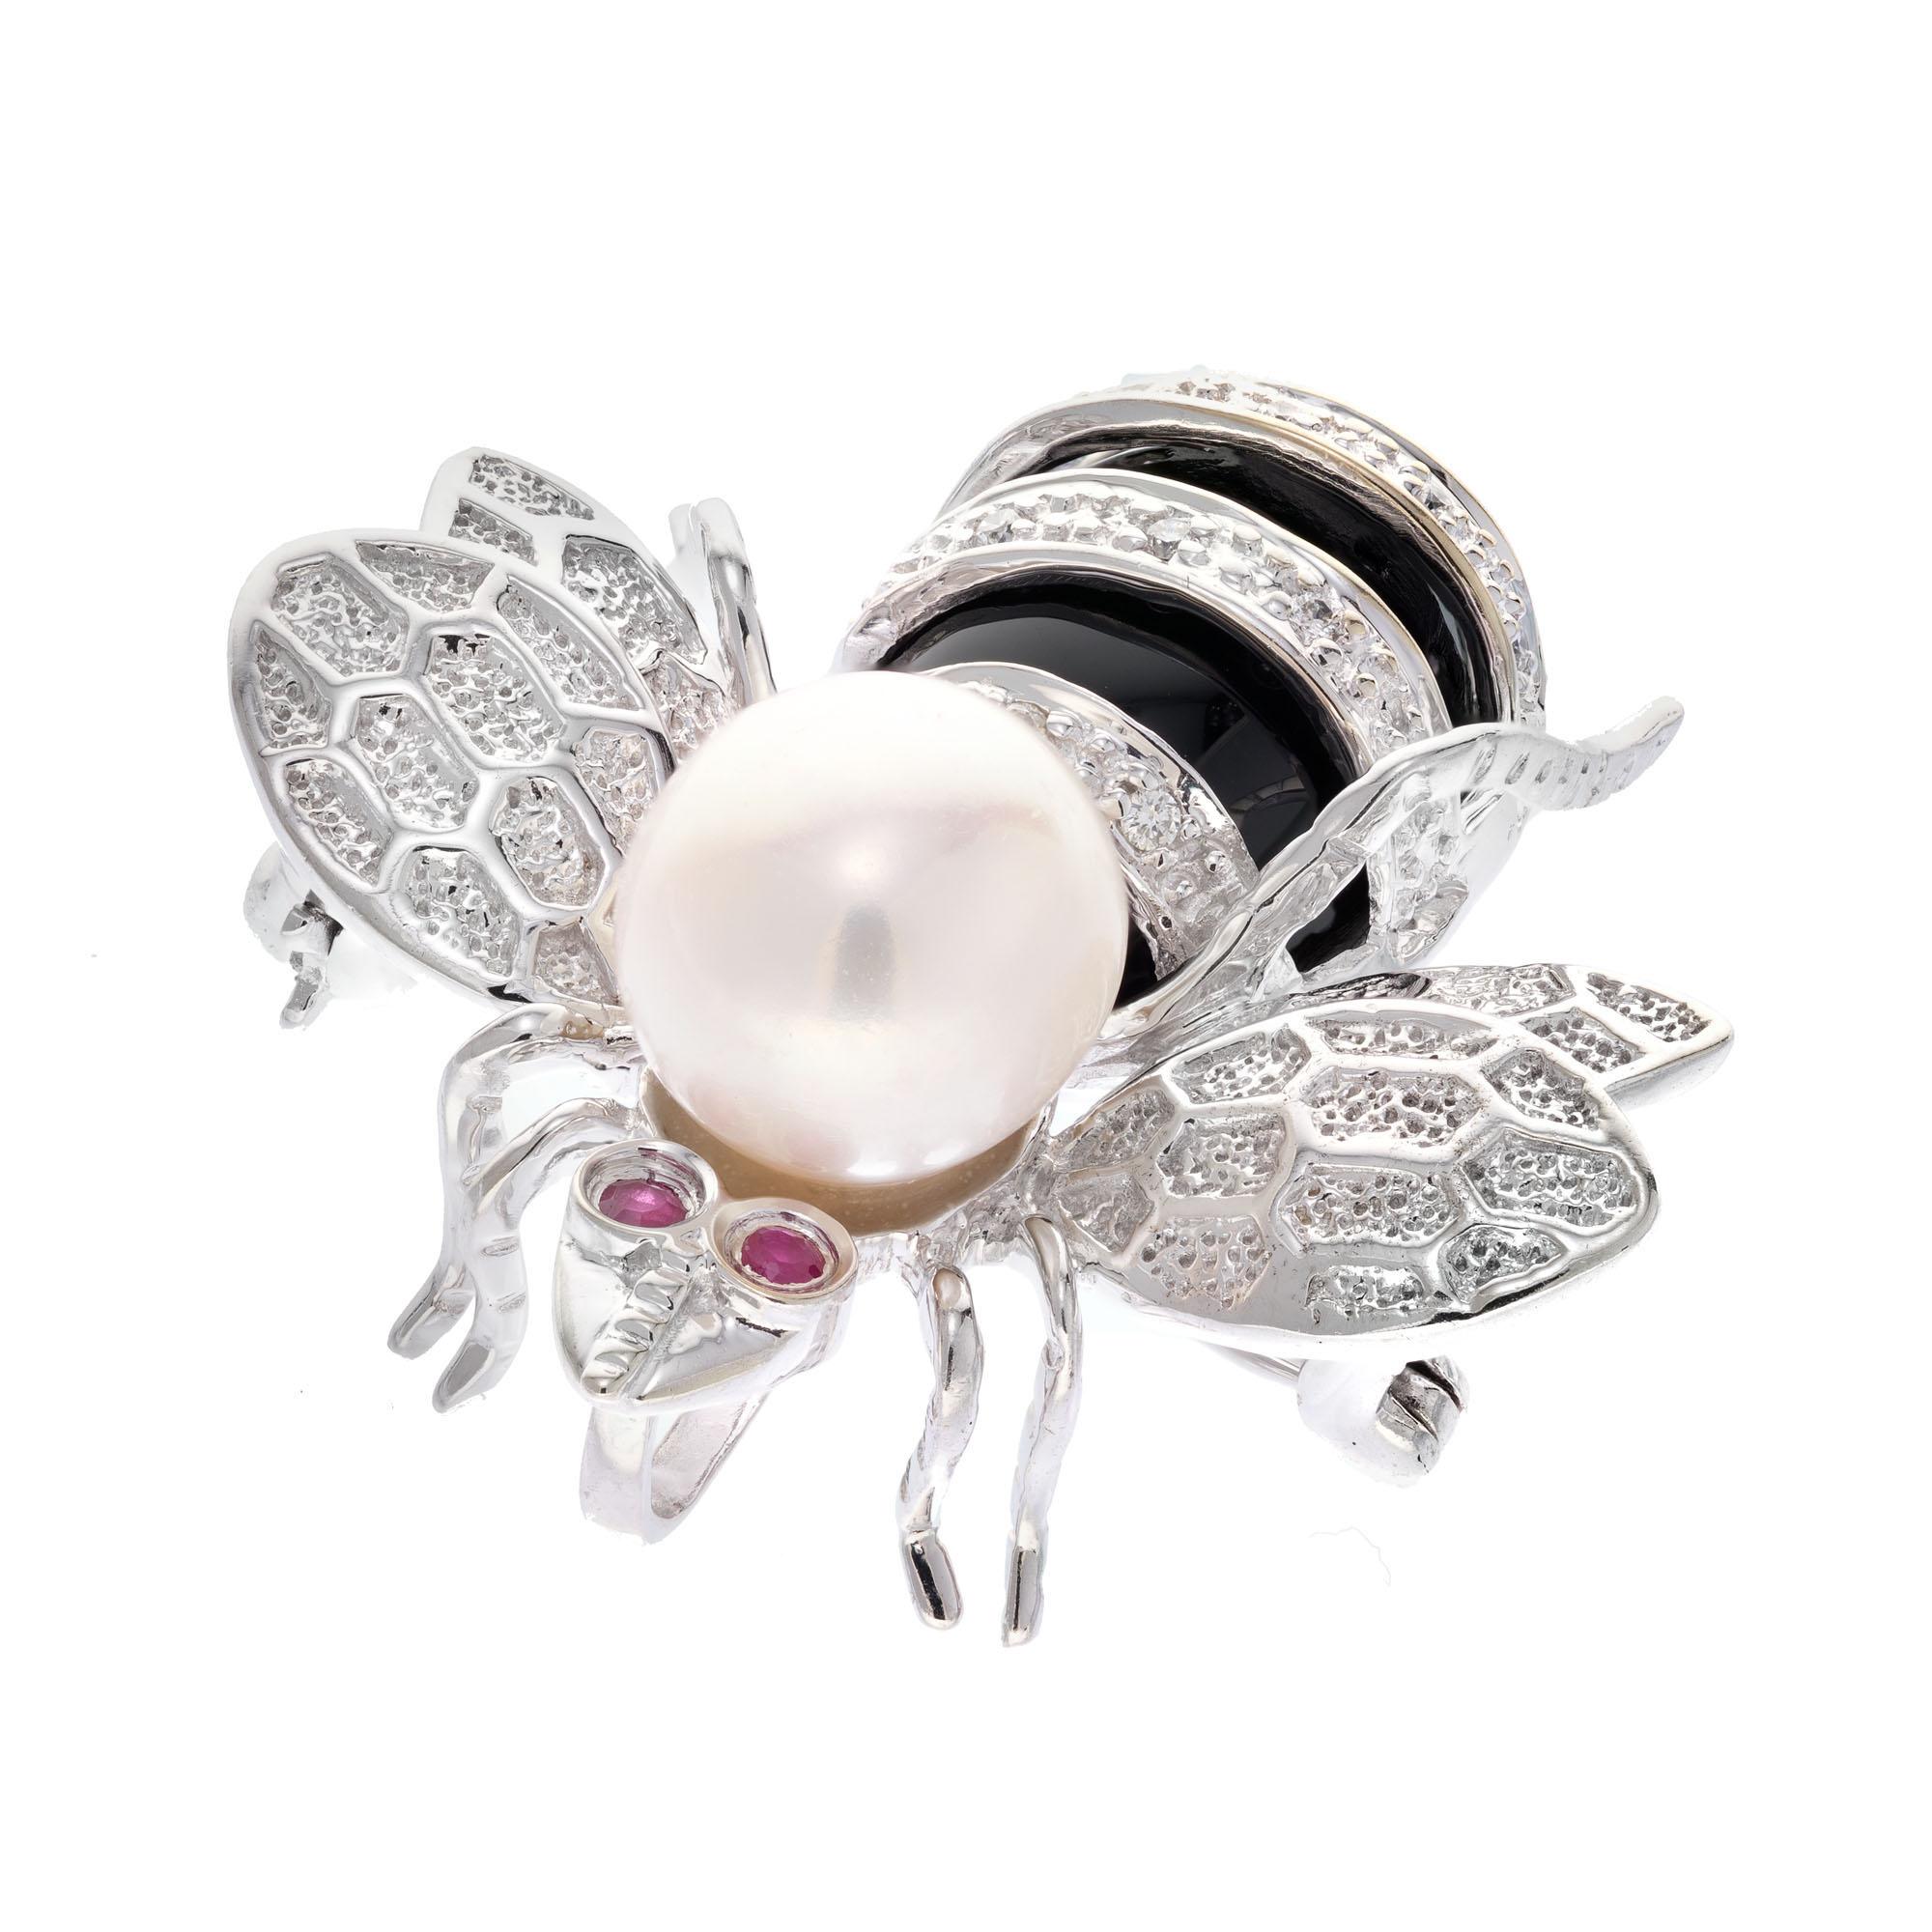 Diamond, ruby and pearl Bee brooch.  14k white gold Bee brooch with ruby eyes, pearl and onyx accents in 14k white gold. There is a loop behind the head for a pendant. 

12 round diamonds, G-H SI approx. .8cts
2 round red rubies, approx. .2cts
1